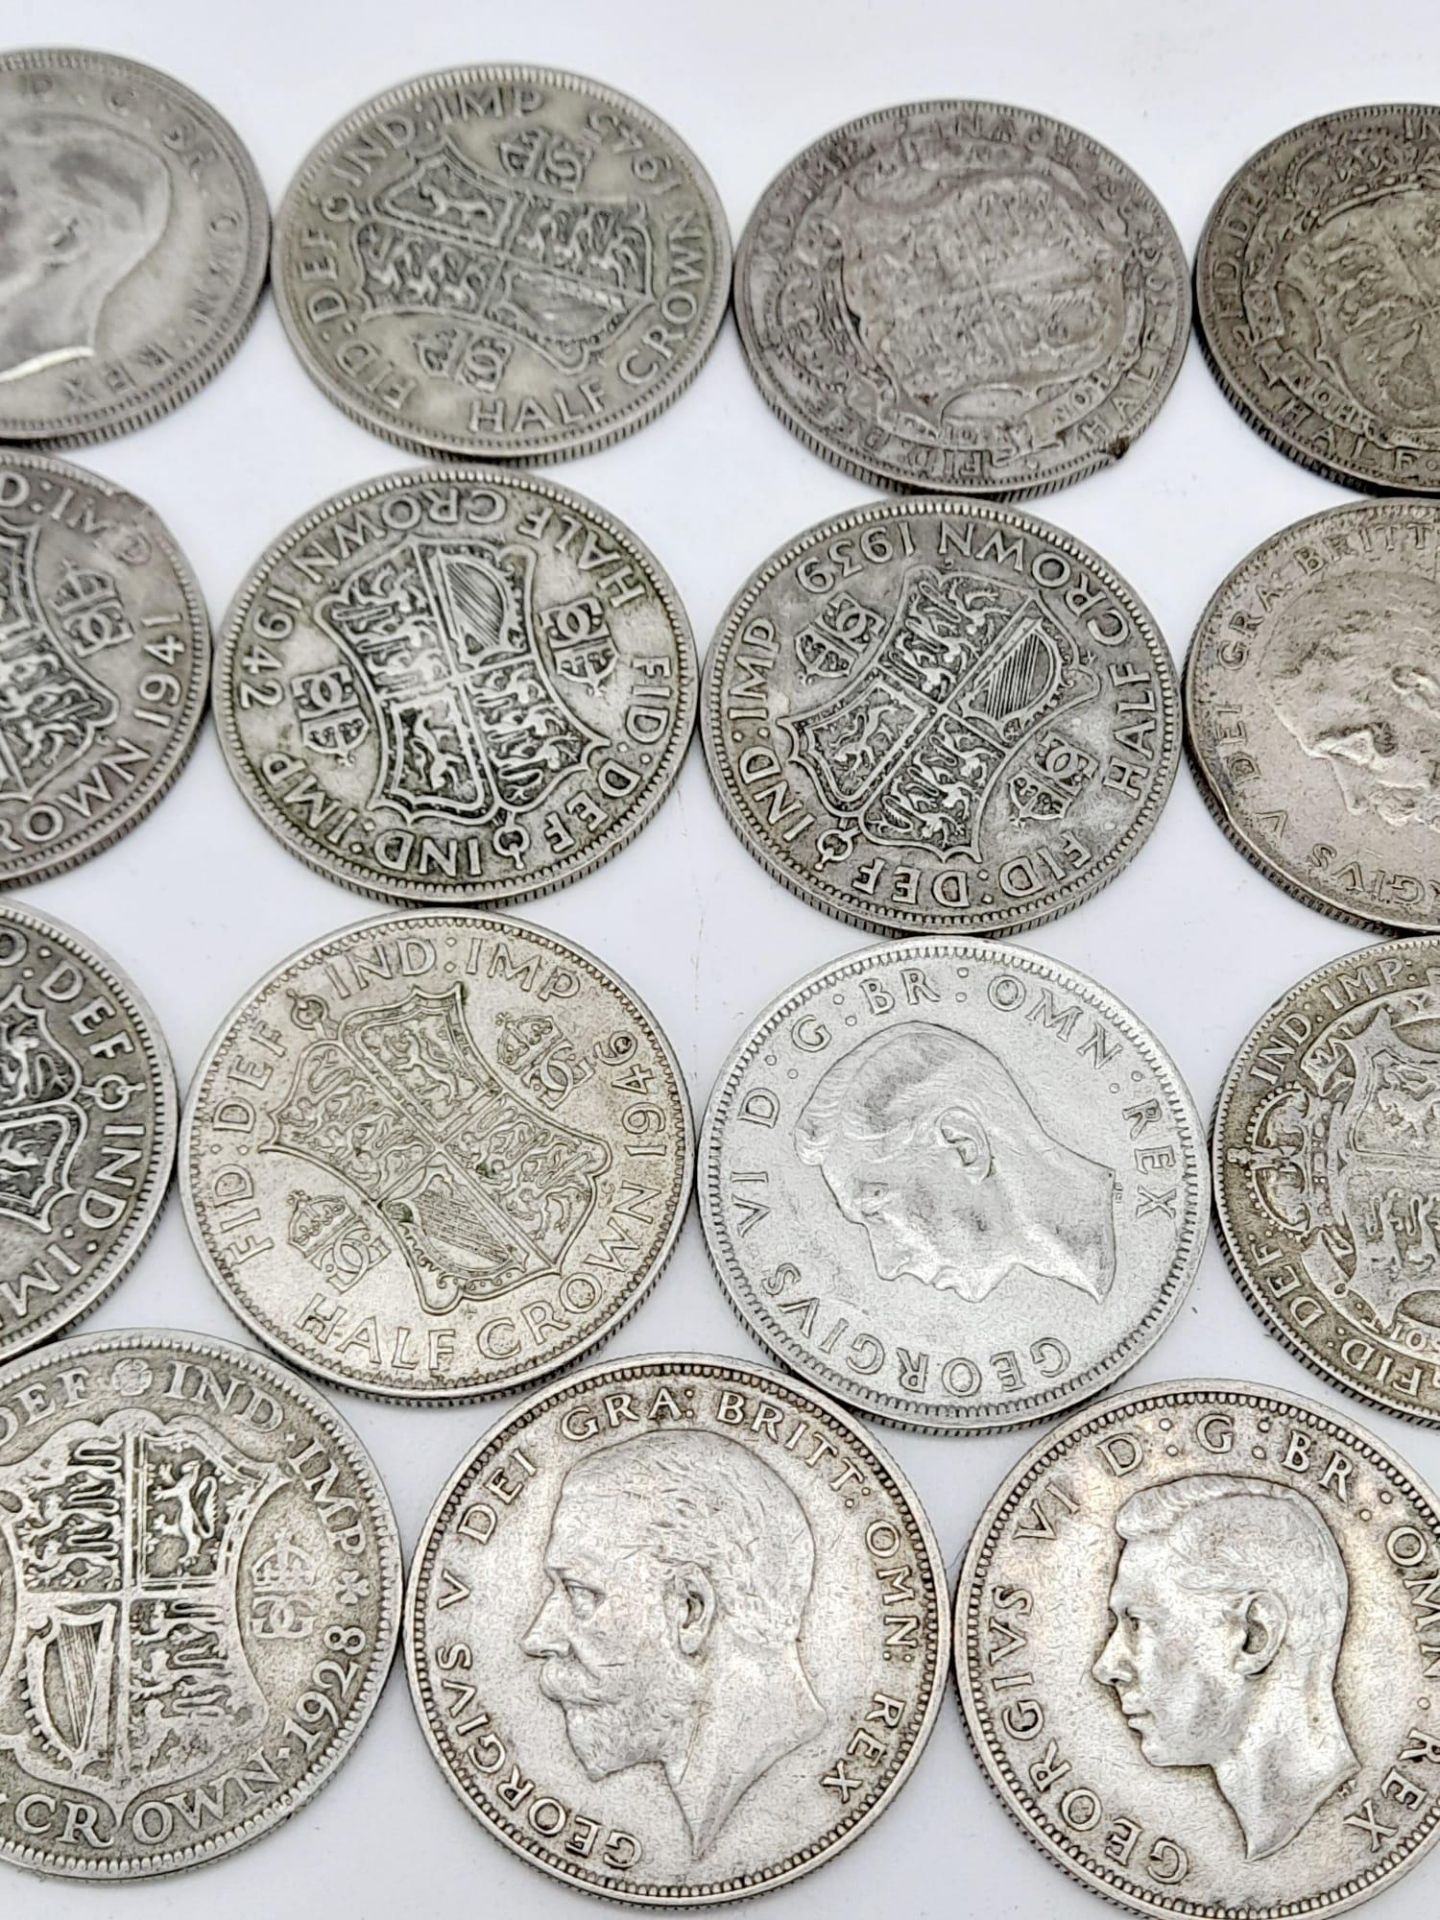 19 Pre 1947 British Silver Half Crown Coins. 265g total weight. - Image 3 of 5